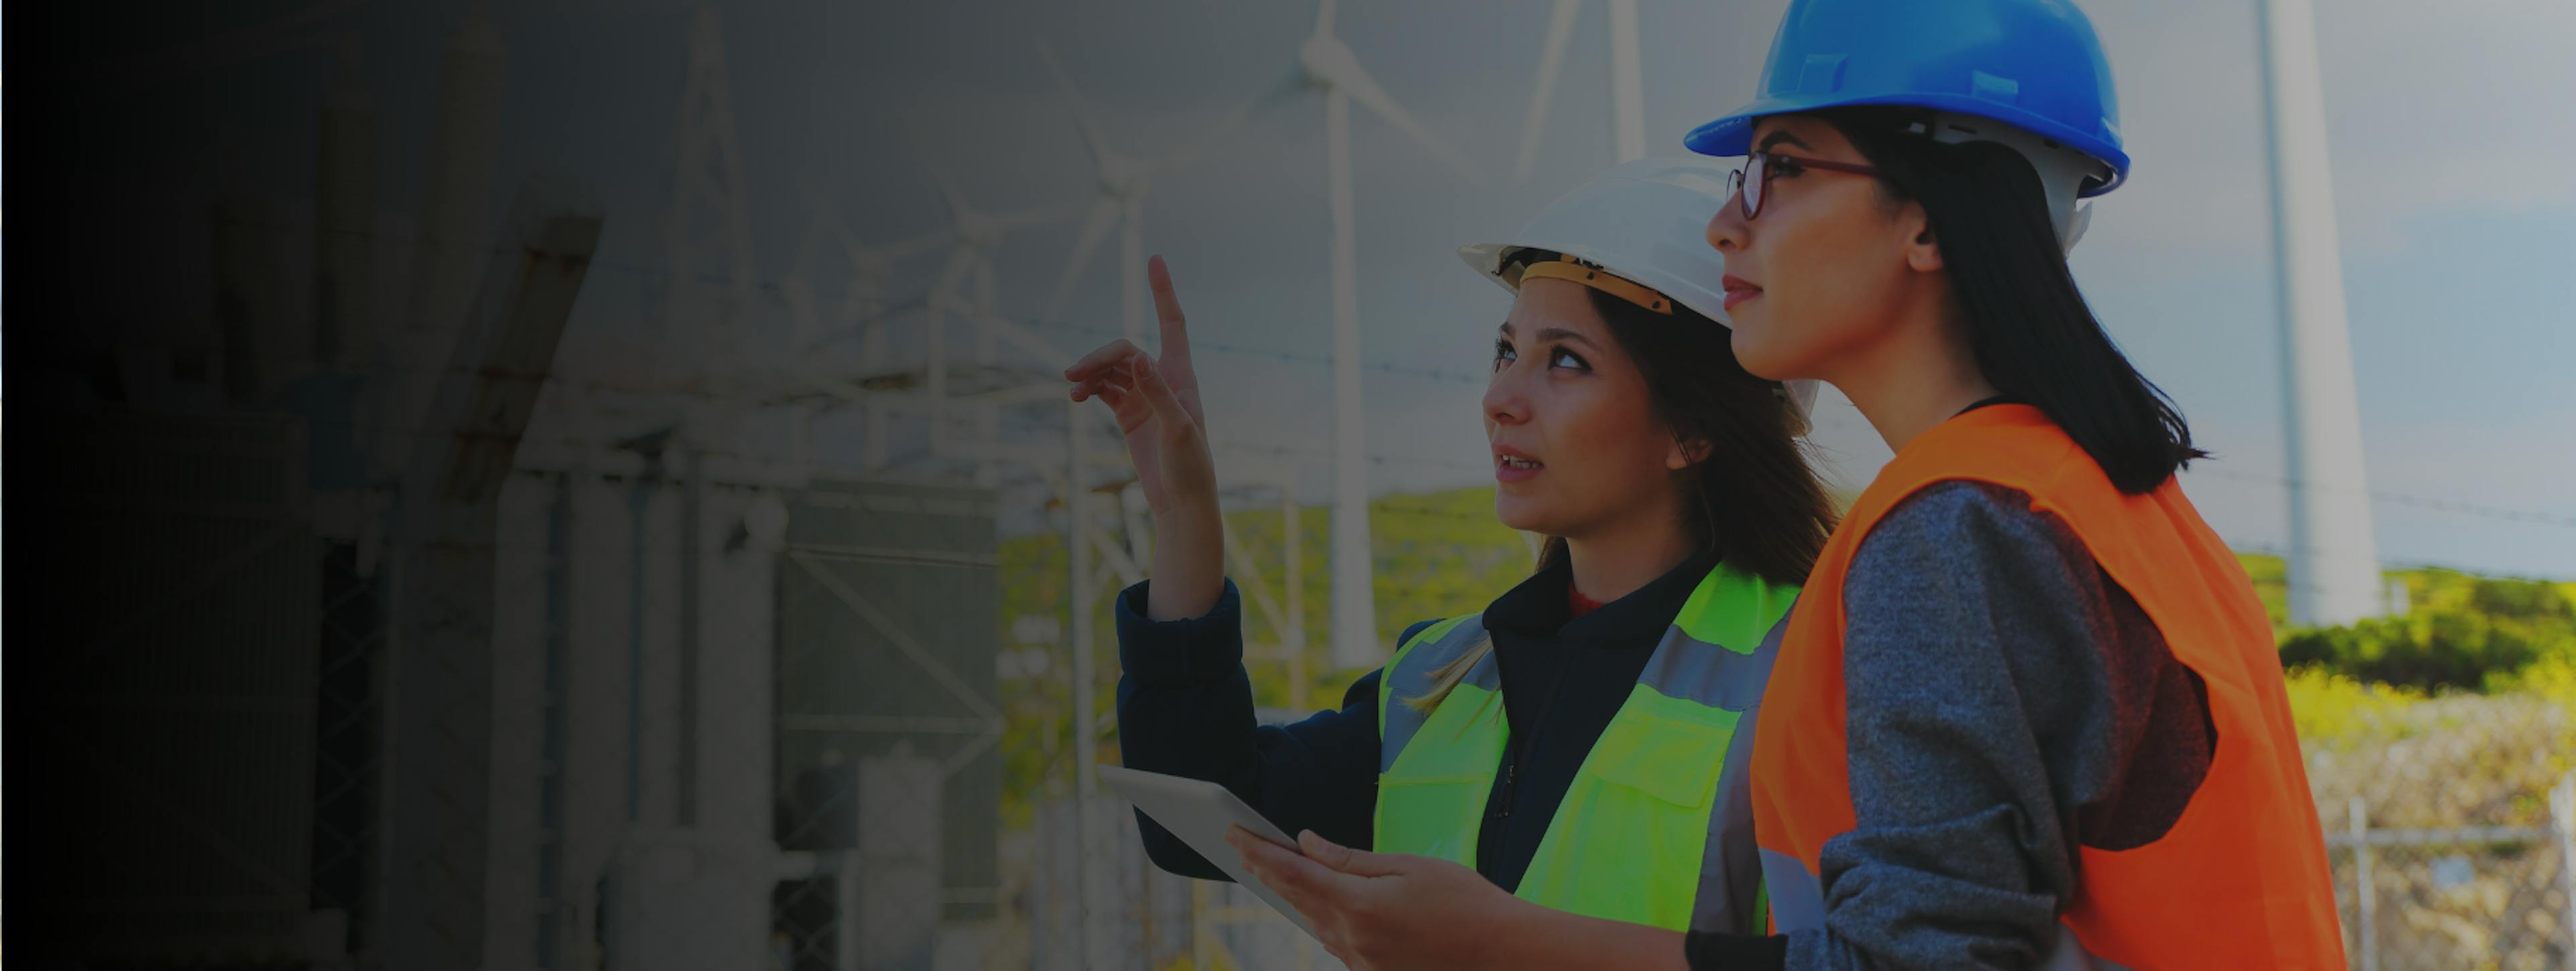 Two women wearing hi-vis vests and hard hats, standing in front of wind towers